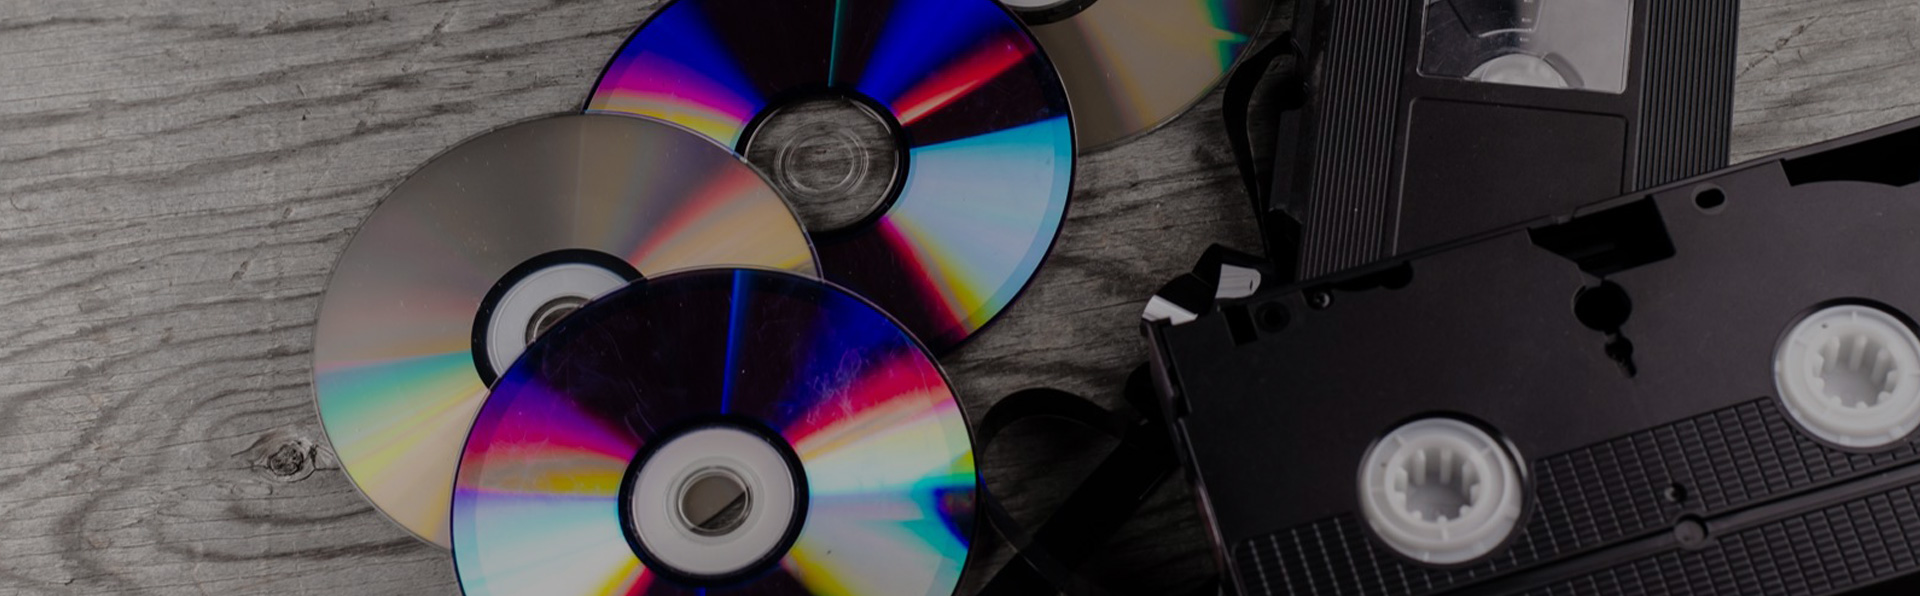 Quality video transfer services of VHS to DVD, located in Buffalo, NY and Tampa, FL